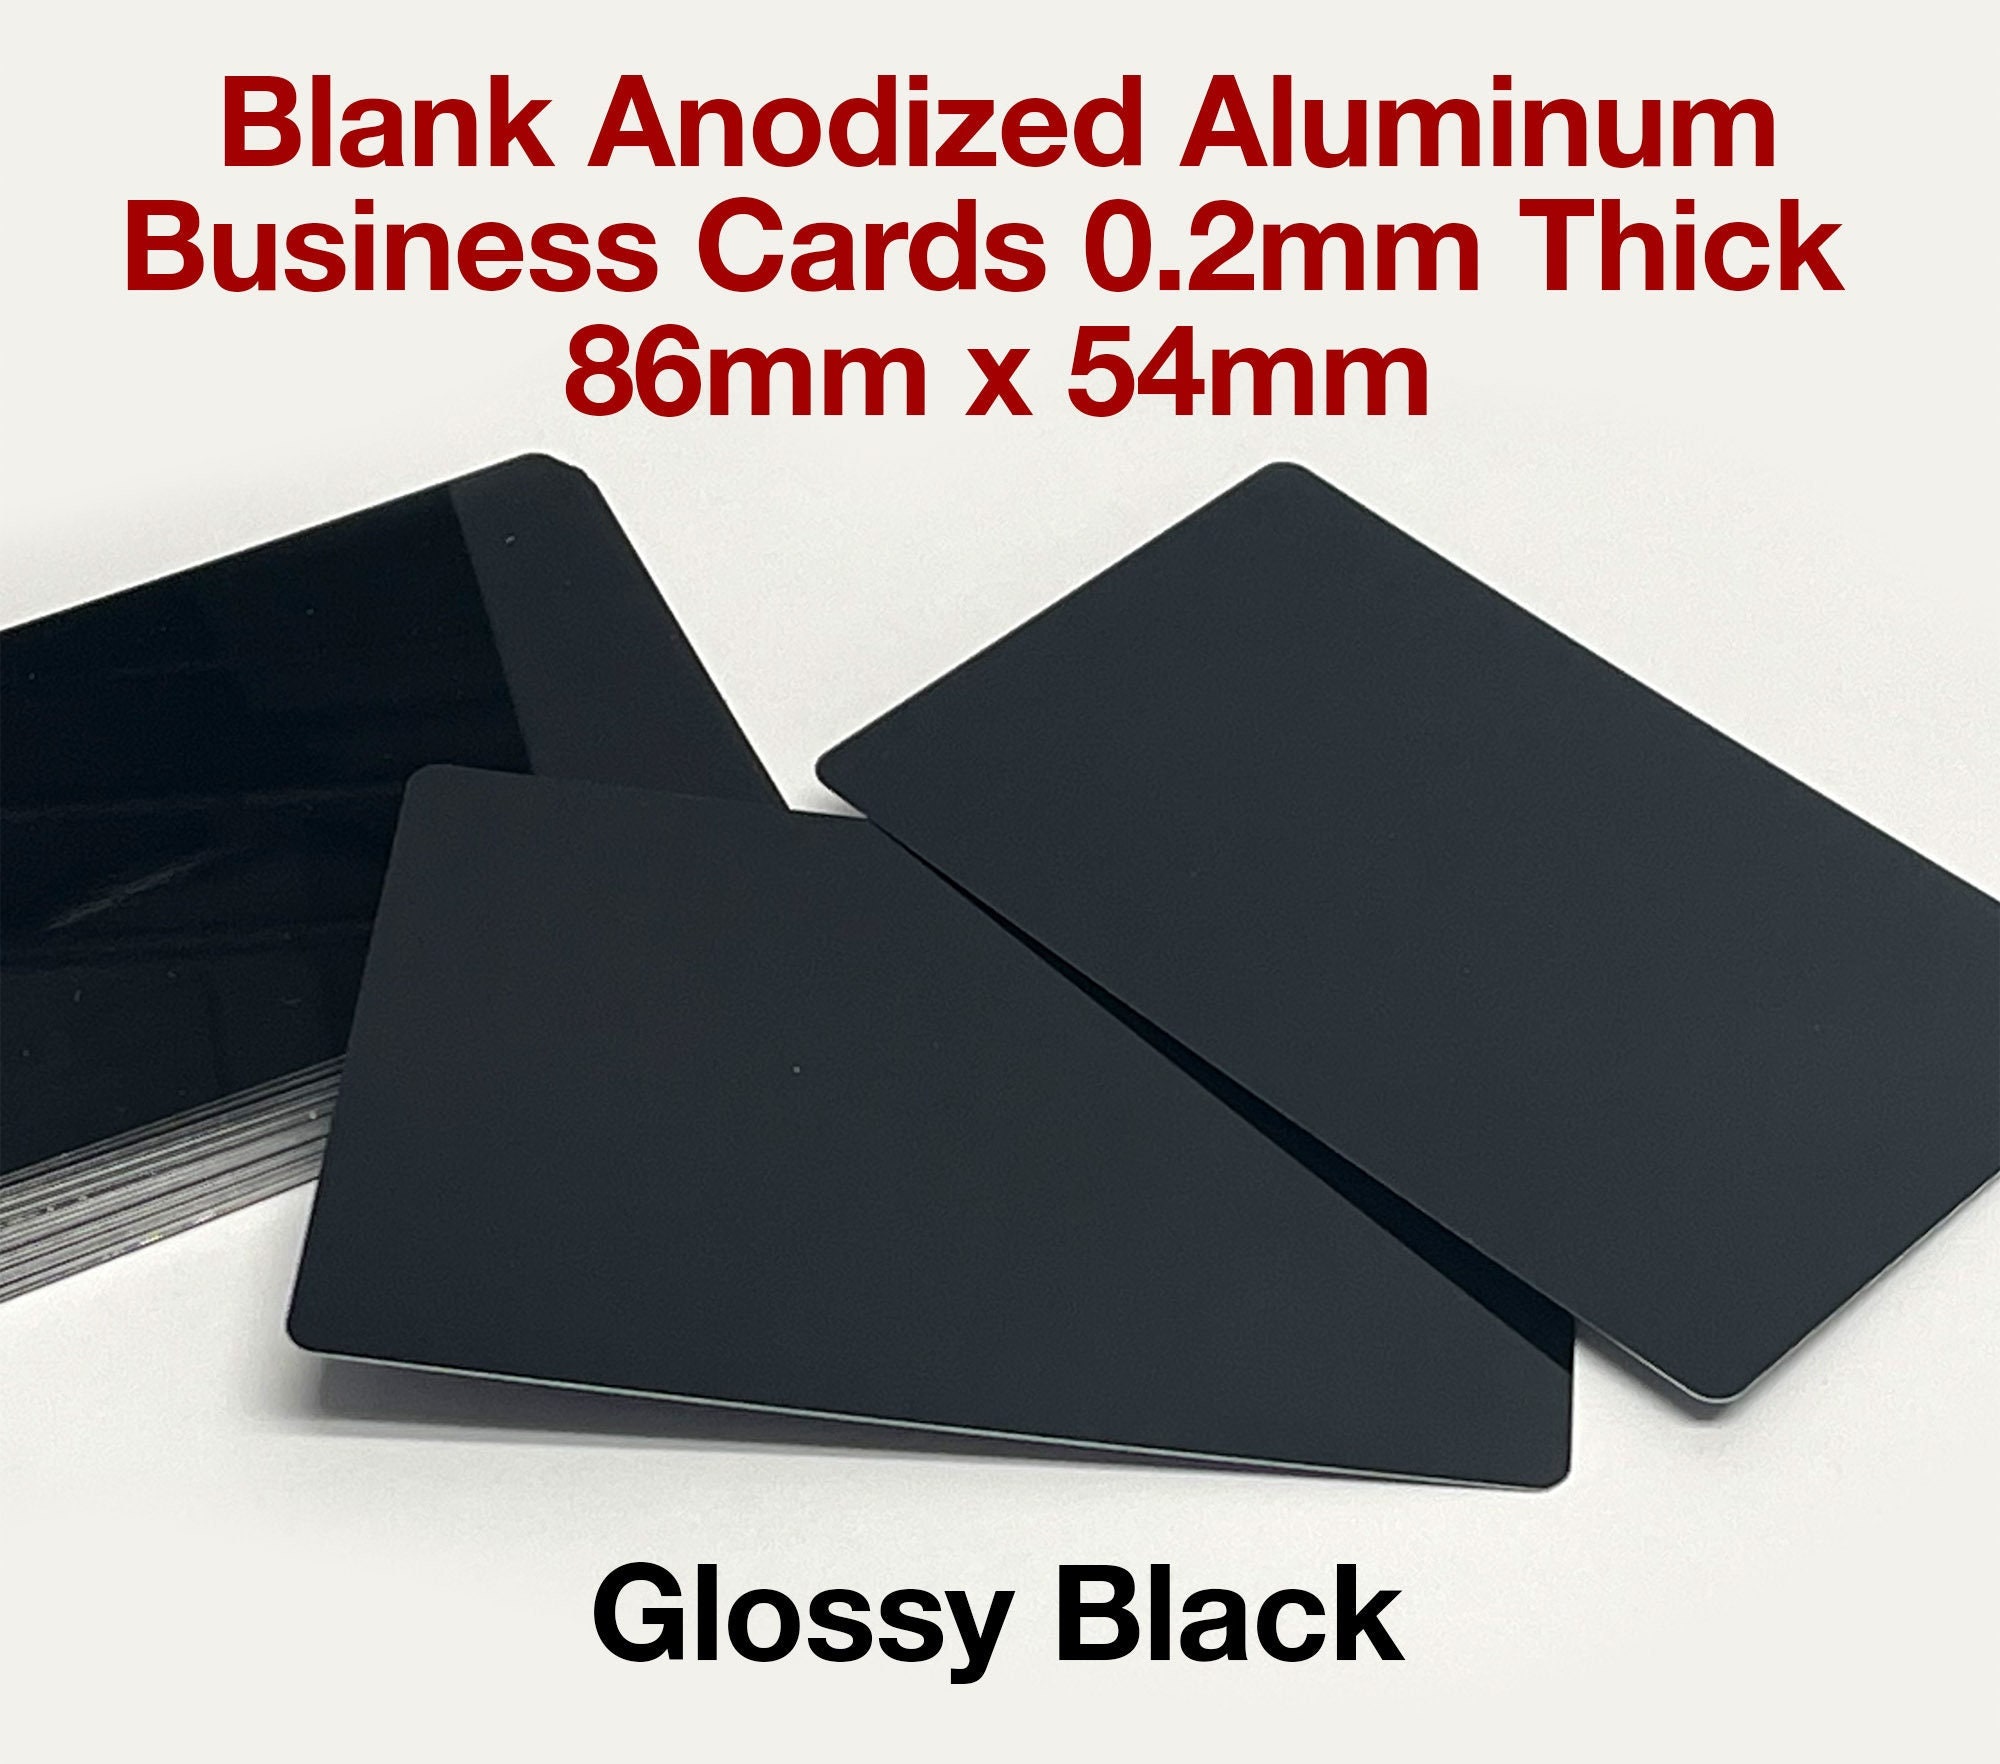 50 Anodized Aluminum Business Card Blanks Metal Business 